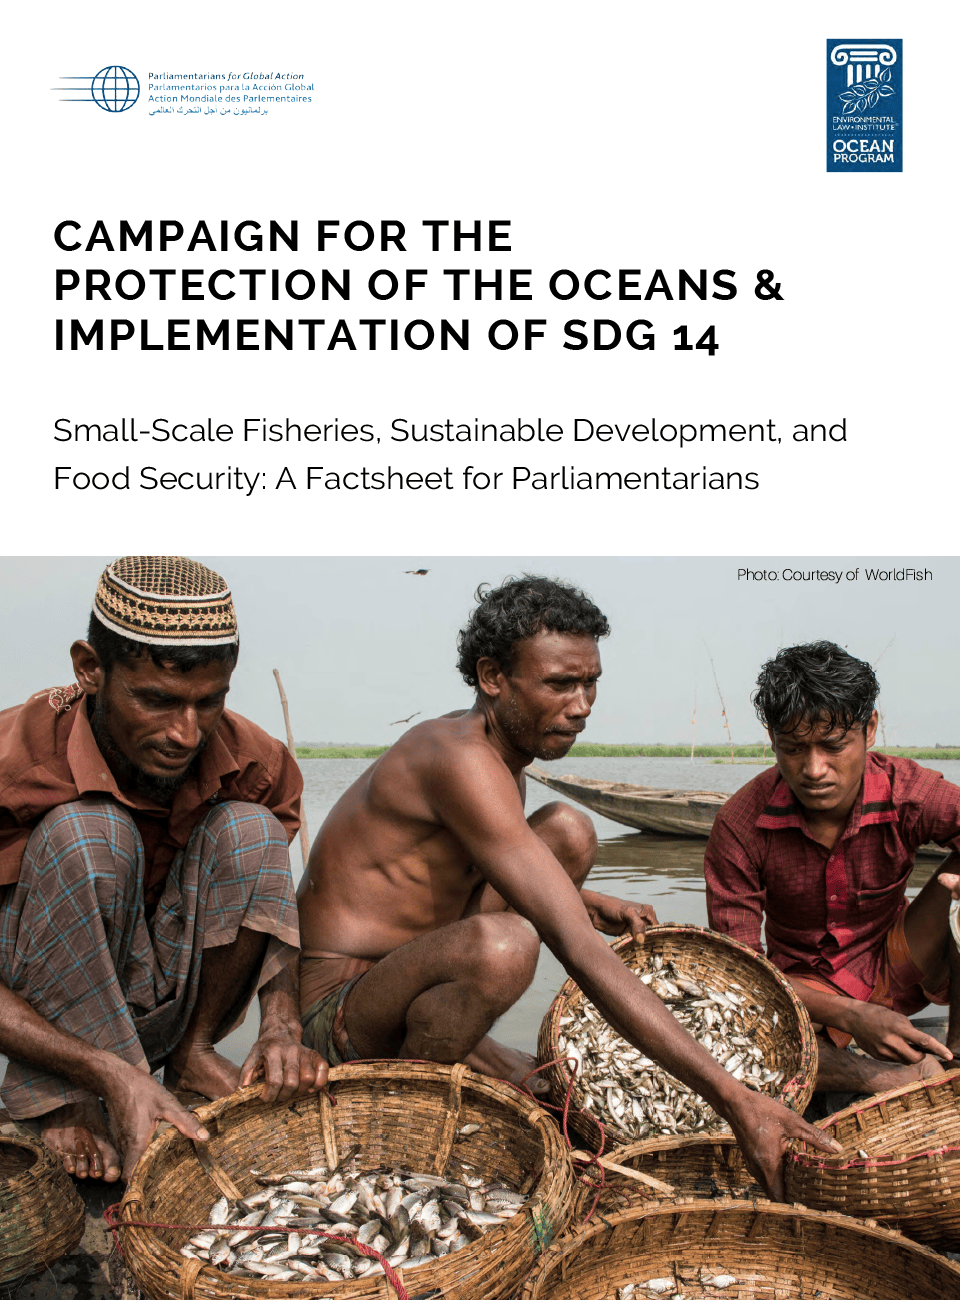 Factsheet for Parliamentarians: Small-Scale Fisheries, Sustainable Development, and Food Security